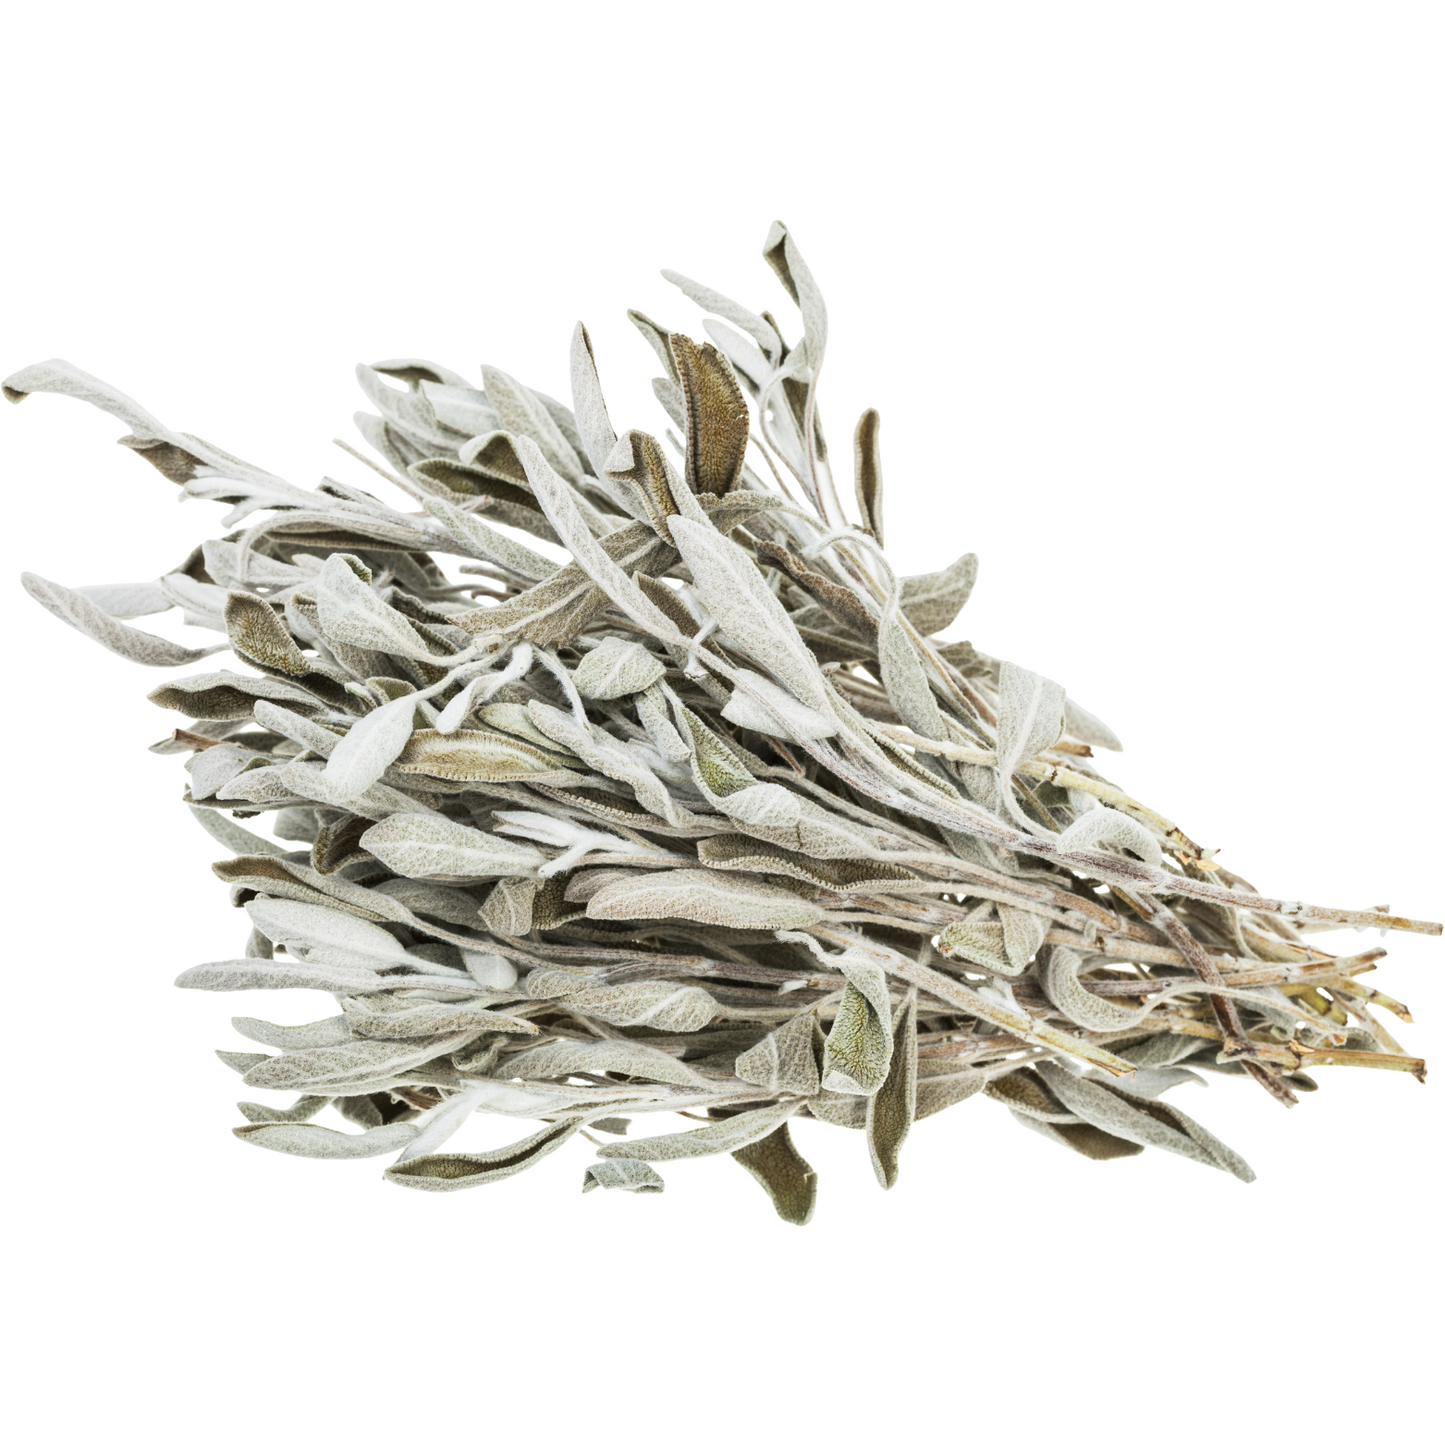 Witchy Pooh's White Sage Whole Leaf for Smudging, Purification and Ritual